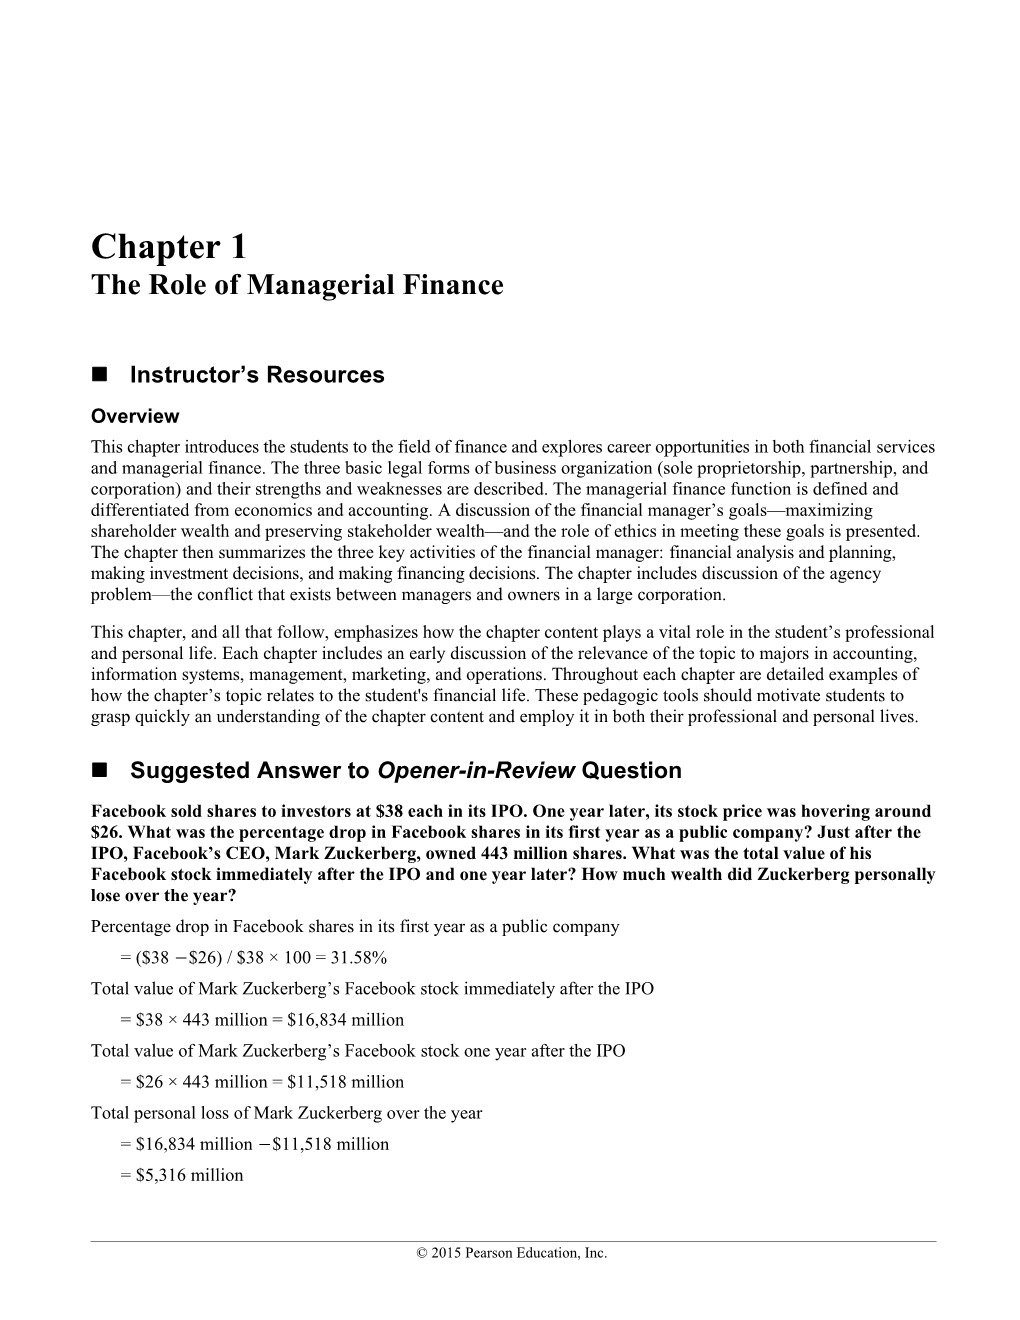 Full File at 1 the Role and Environment of Managerial Finance 19